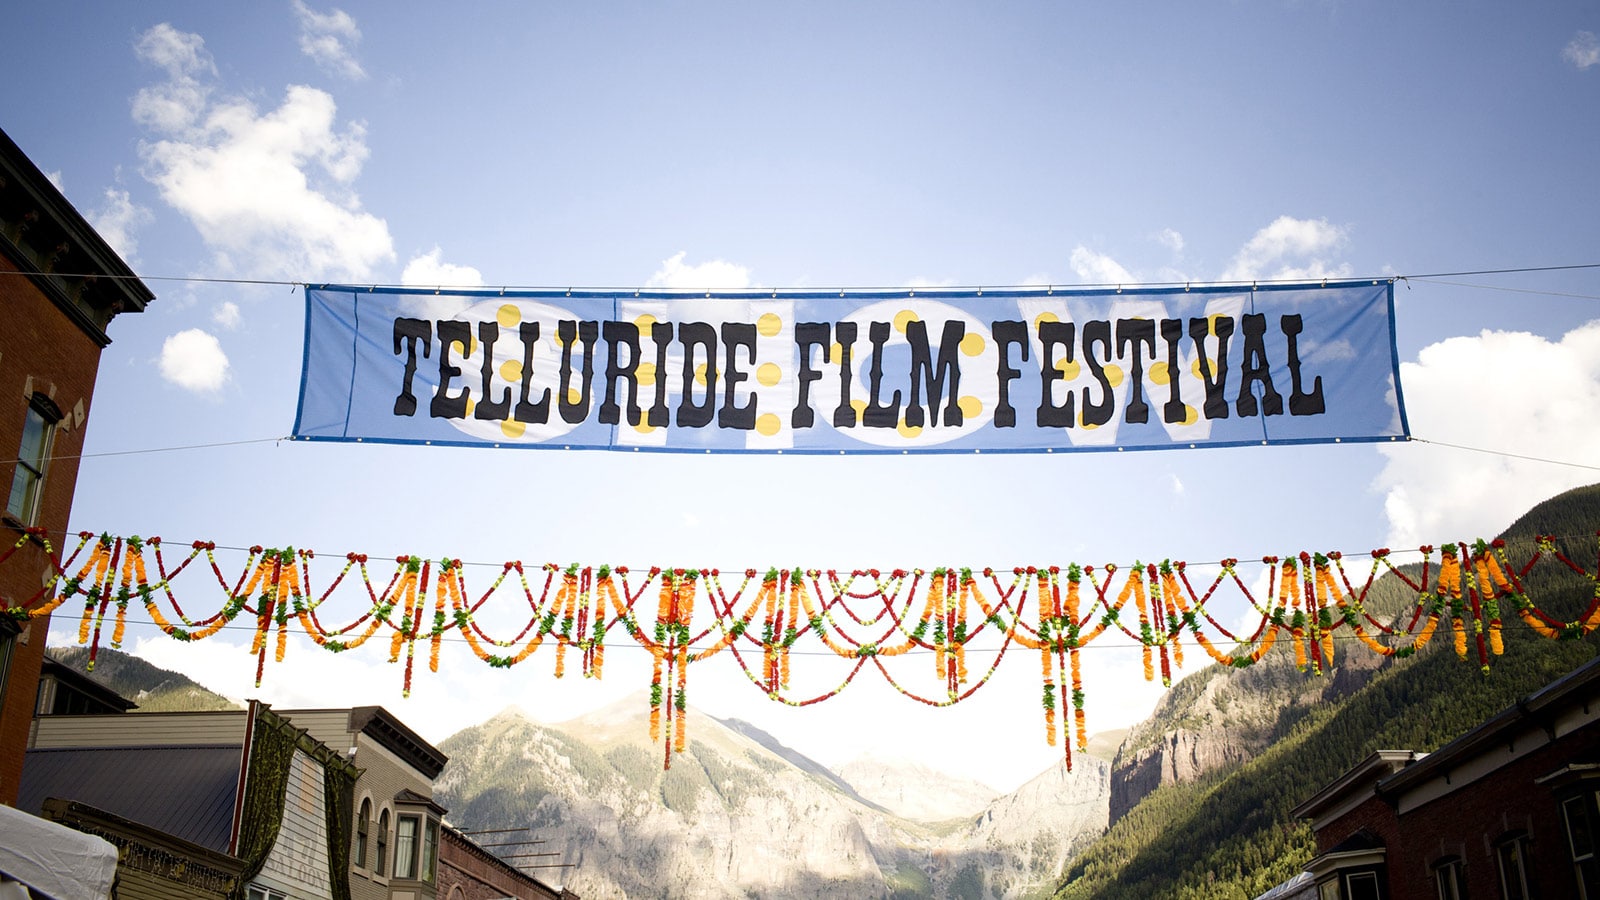 Review of Meyer Sound System at 2012 Telluride Film Festival: 